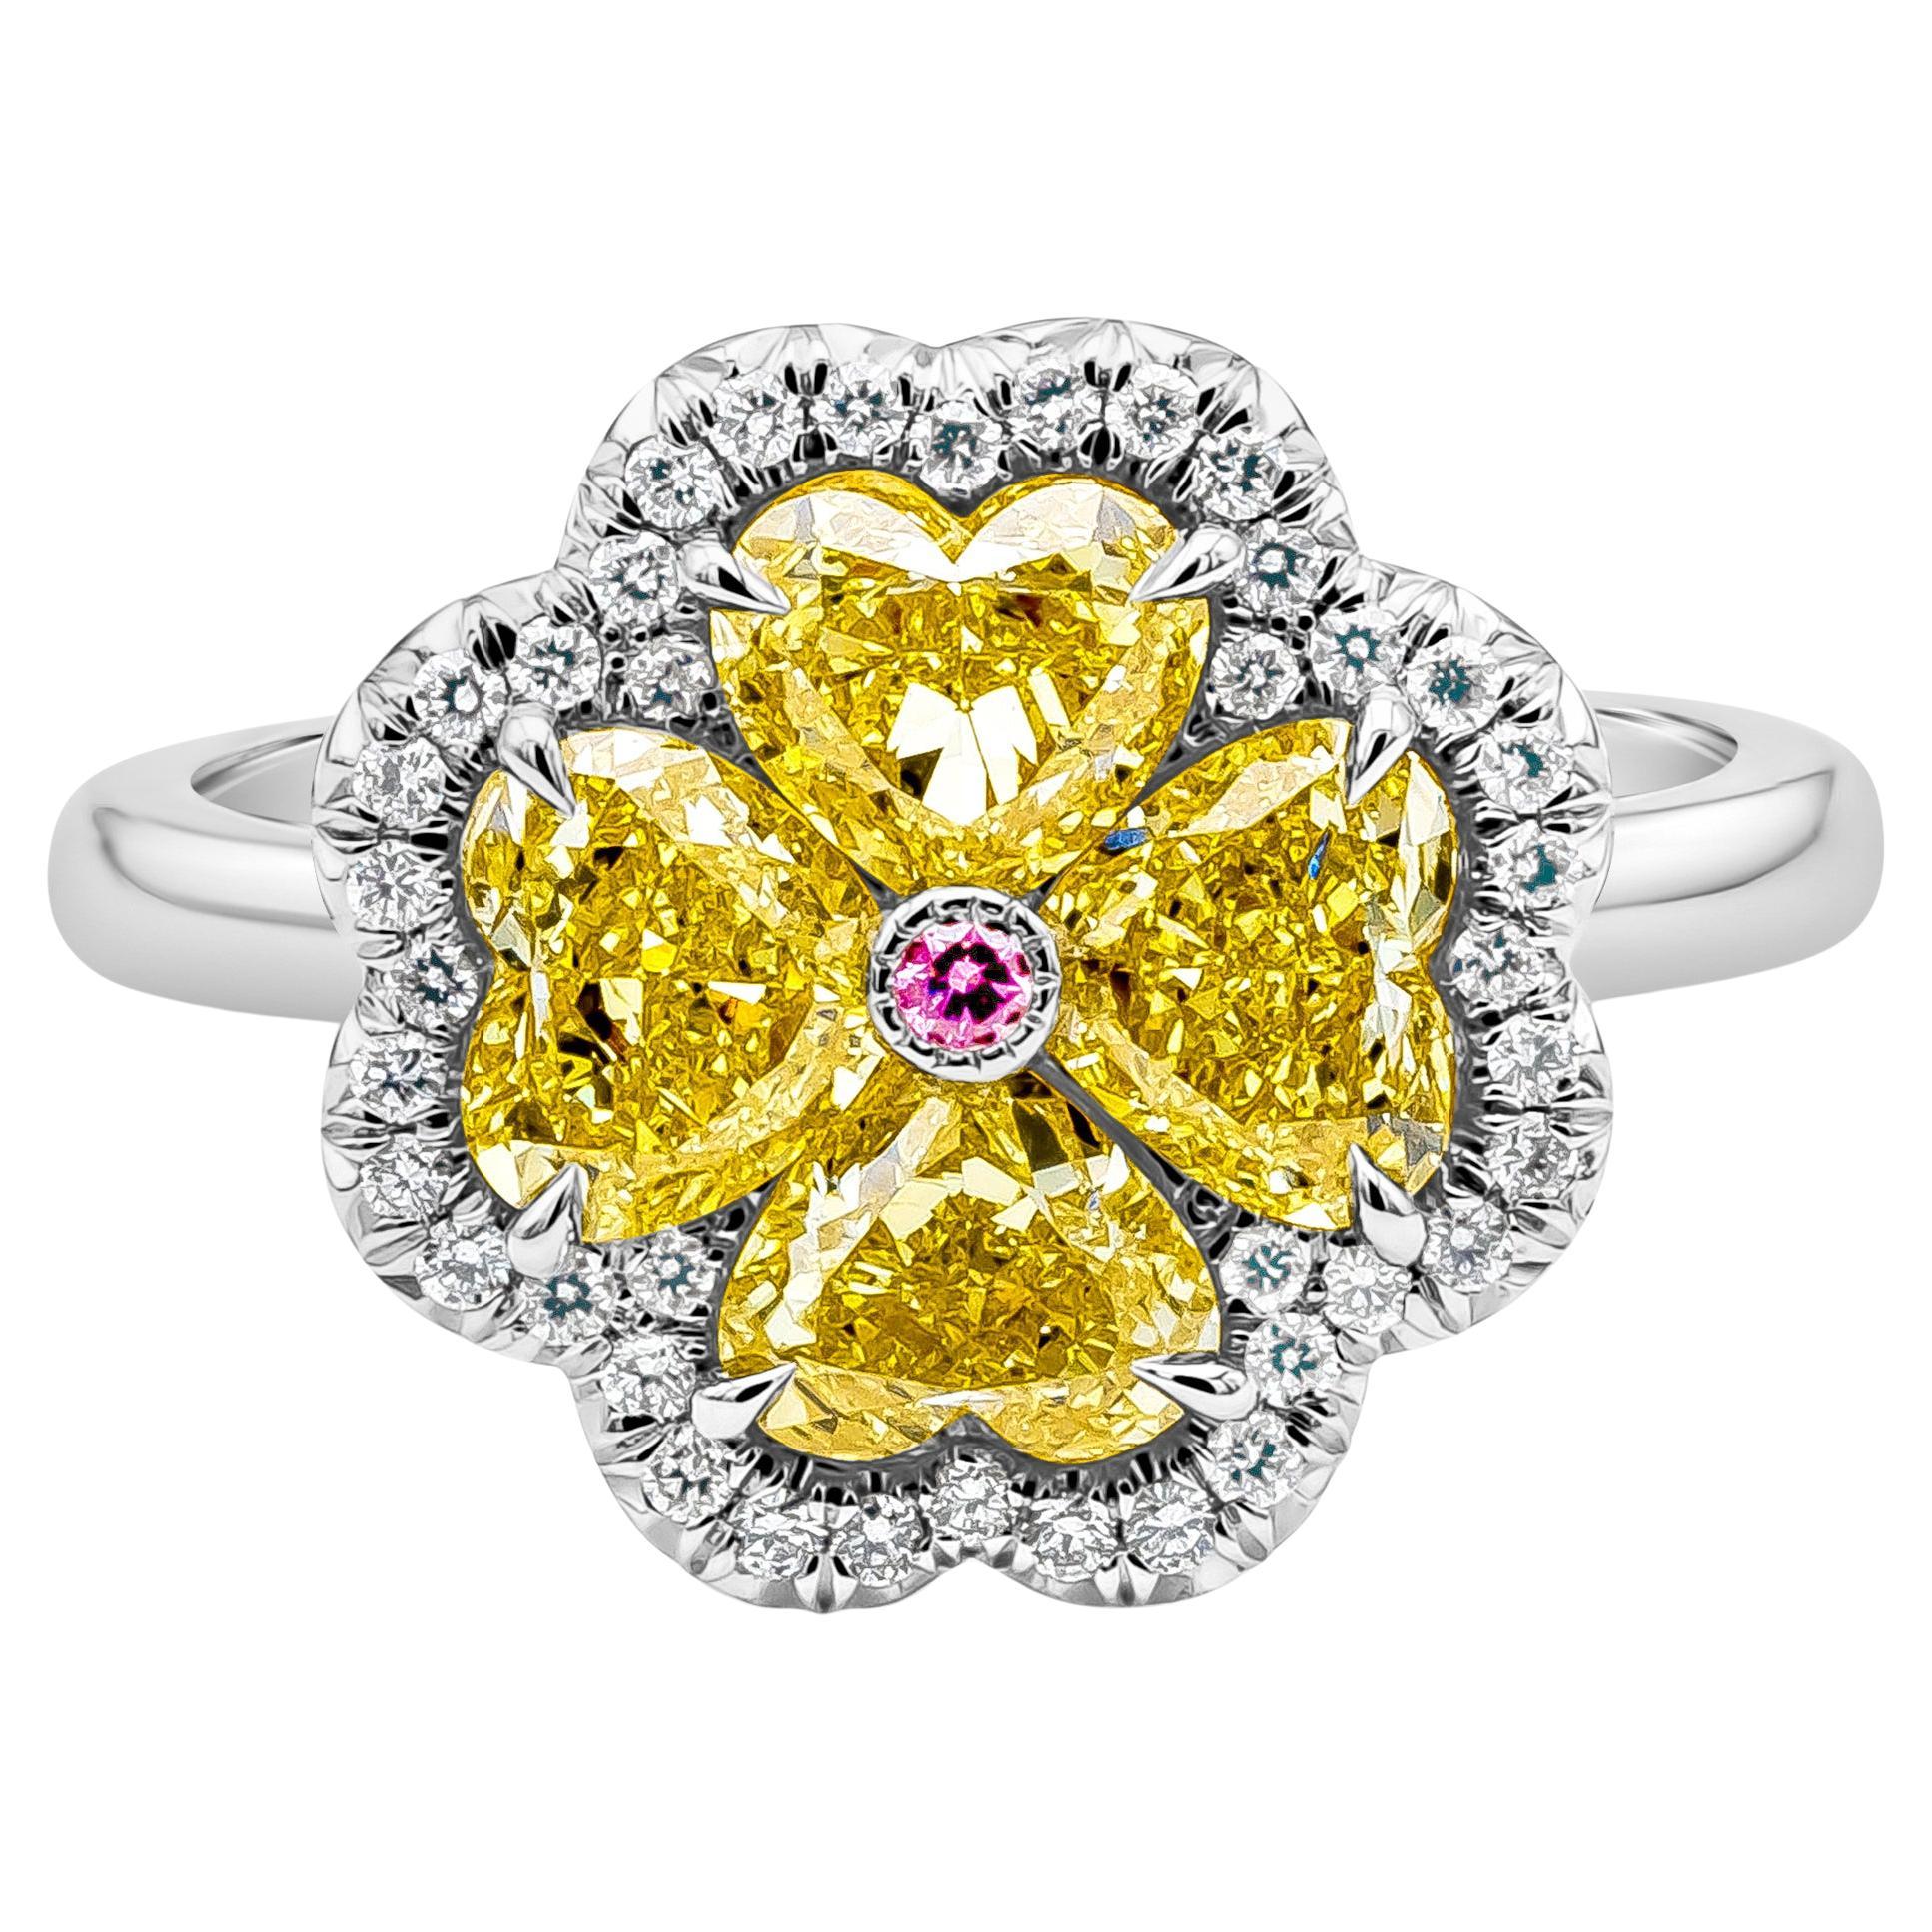 2.21 Carats Heart Shape Fancy Intense Yellow Diamond Clover Leaf Fashion Ring For Sale